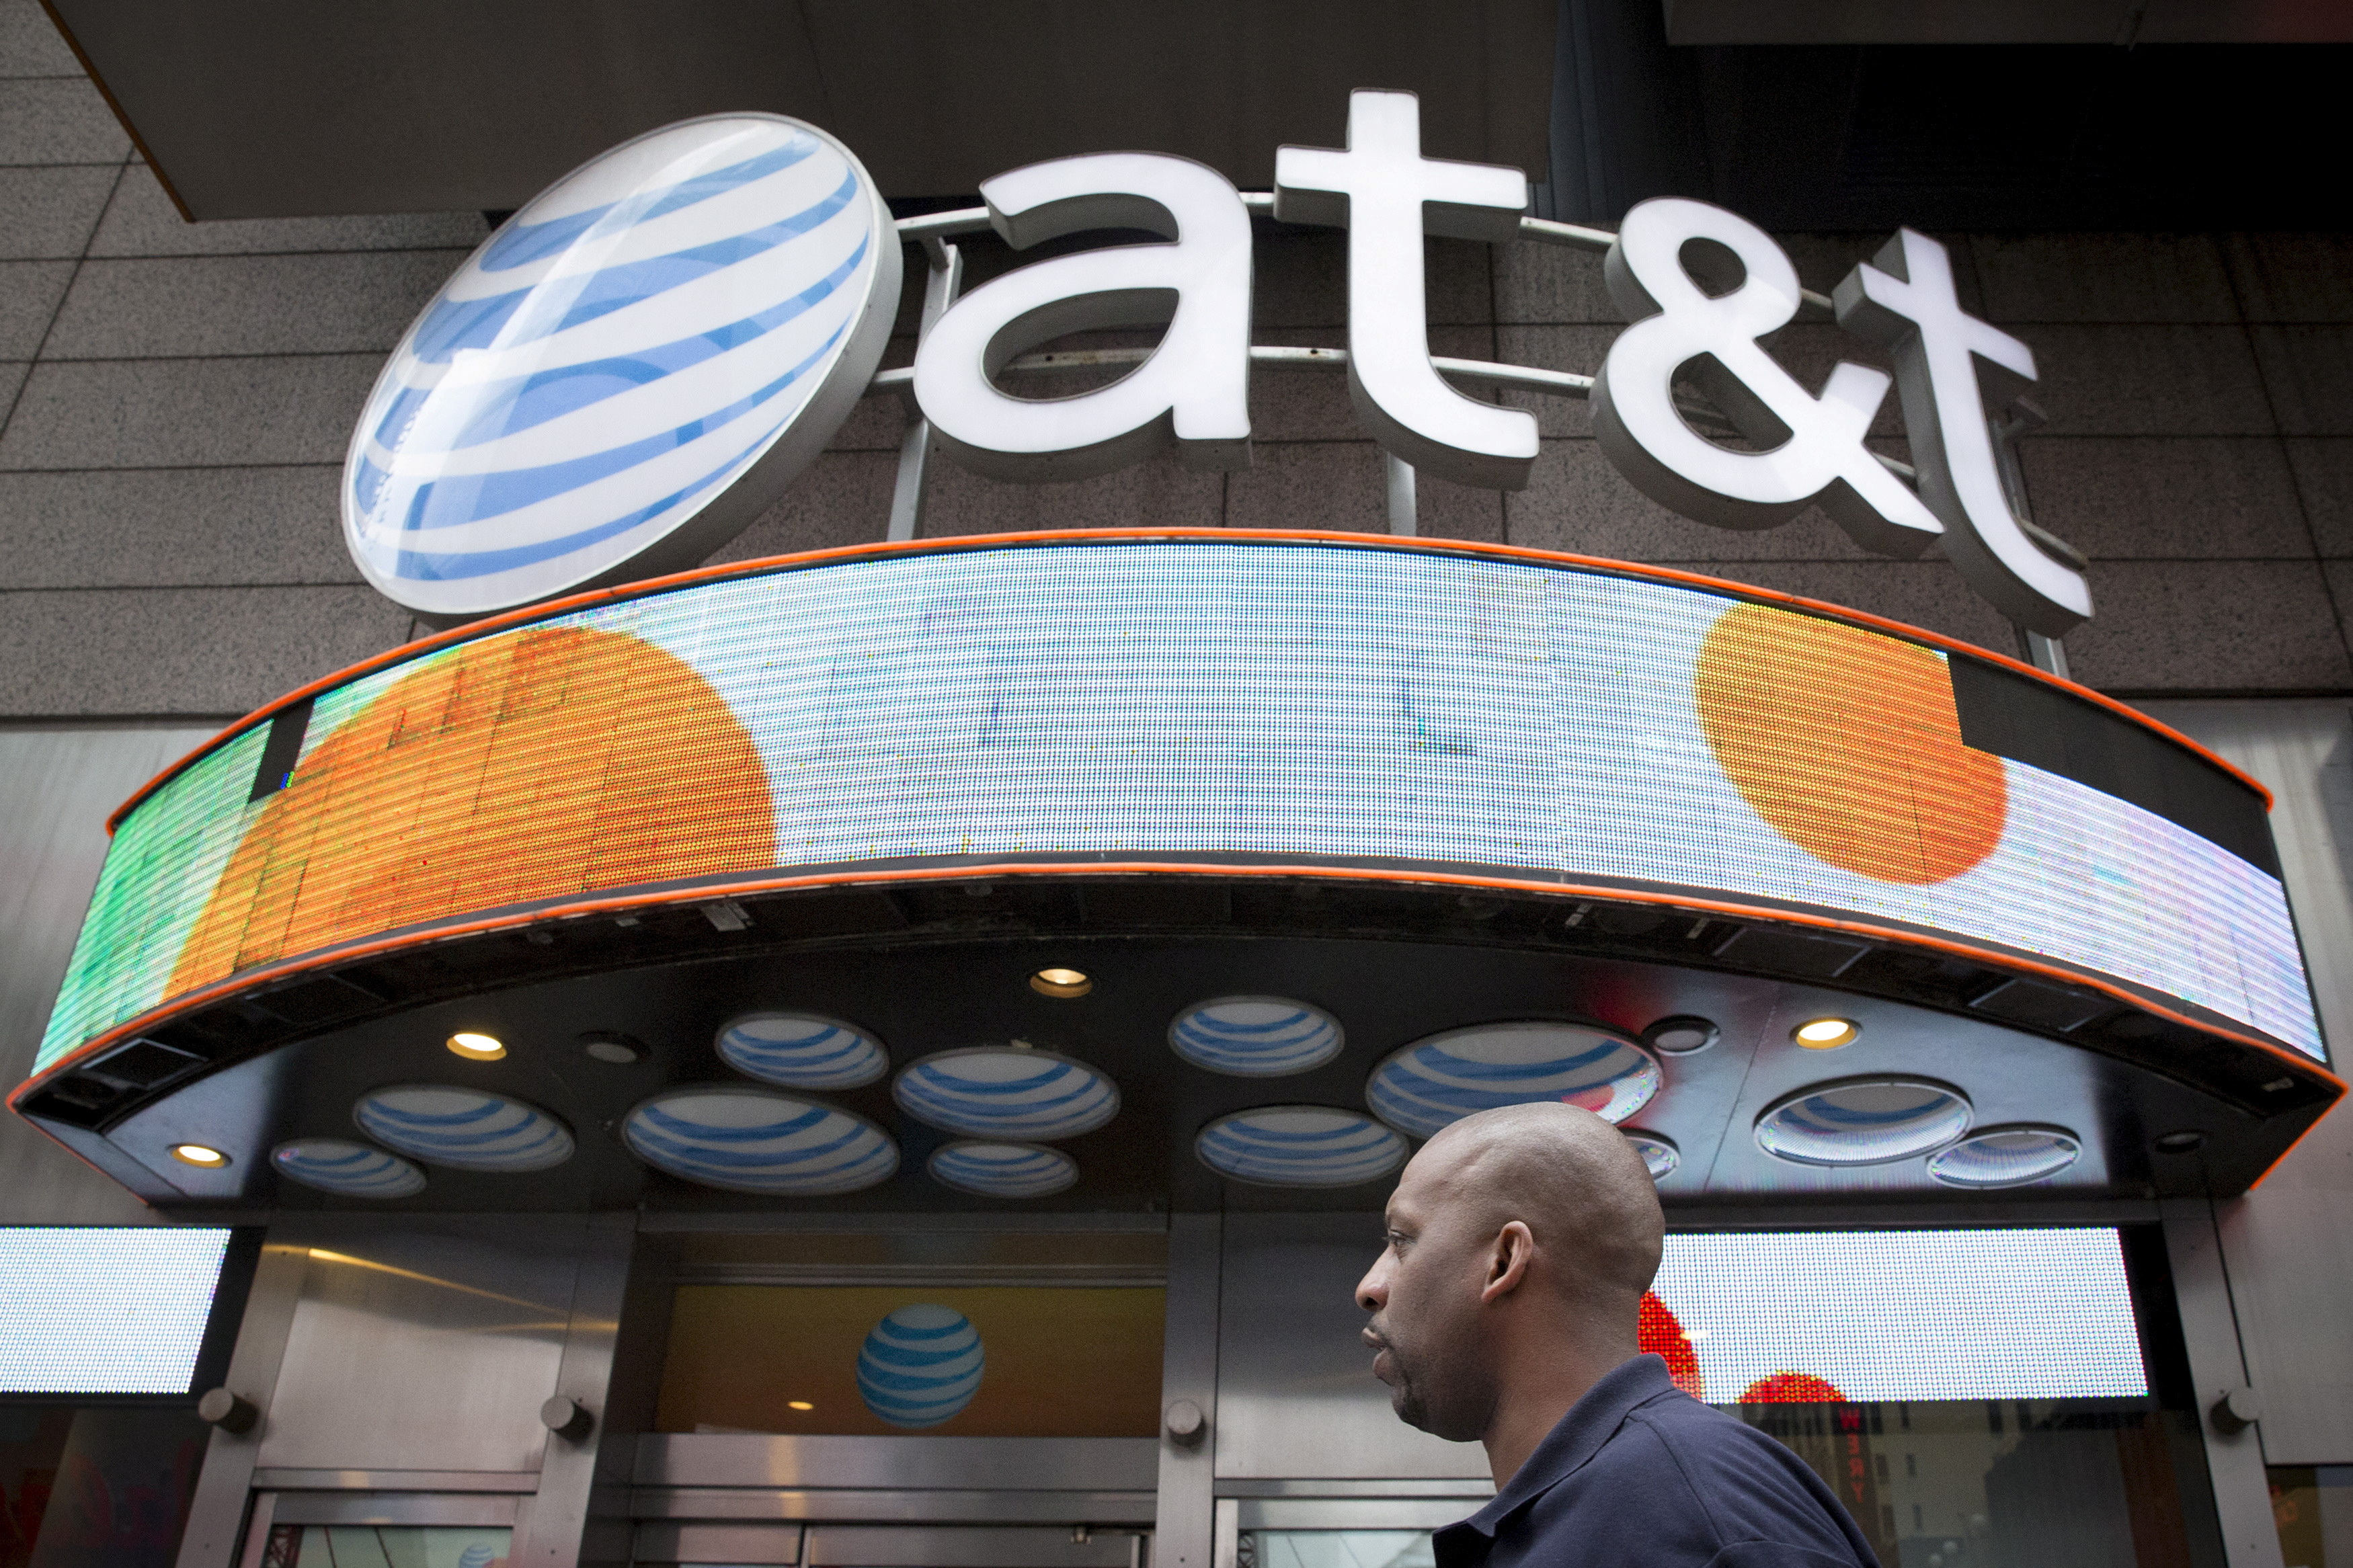 A man walks past the AT&T store in New York's Times Square